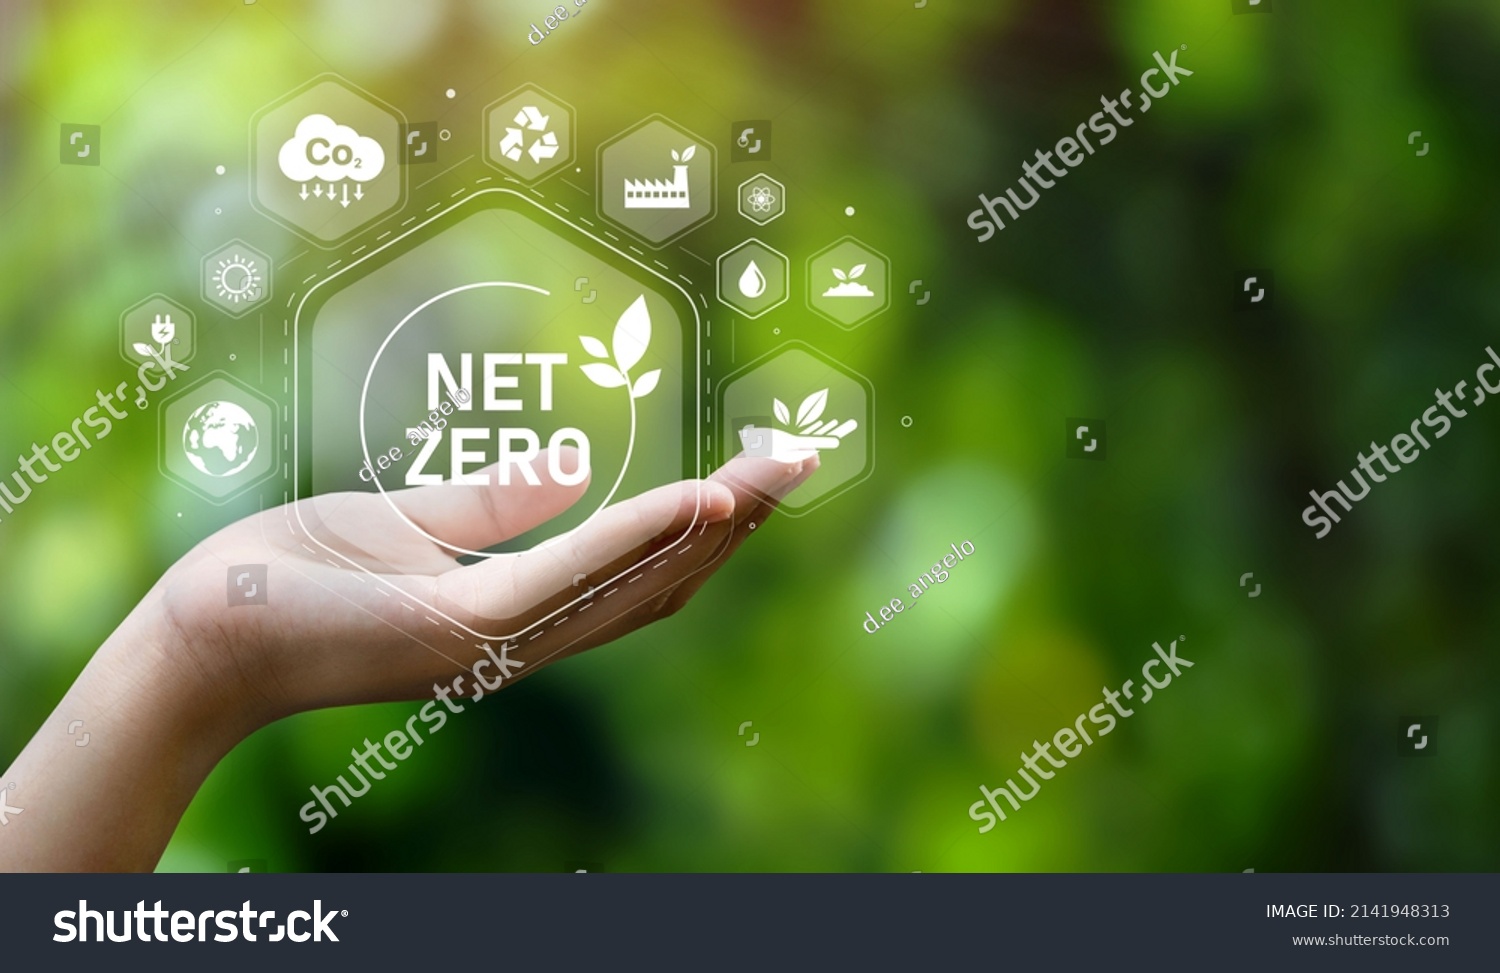 The concept of carbon neutral and net zero. natural environment A climate-neutral long-term strategy greenhouse gas emissions targets with green net center icon on hand cap and green background #2141948313